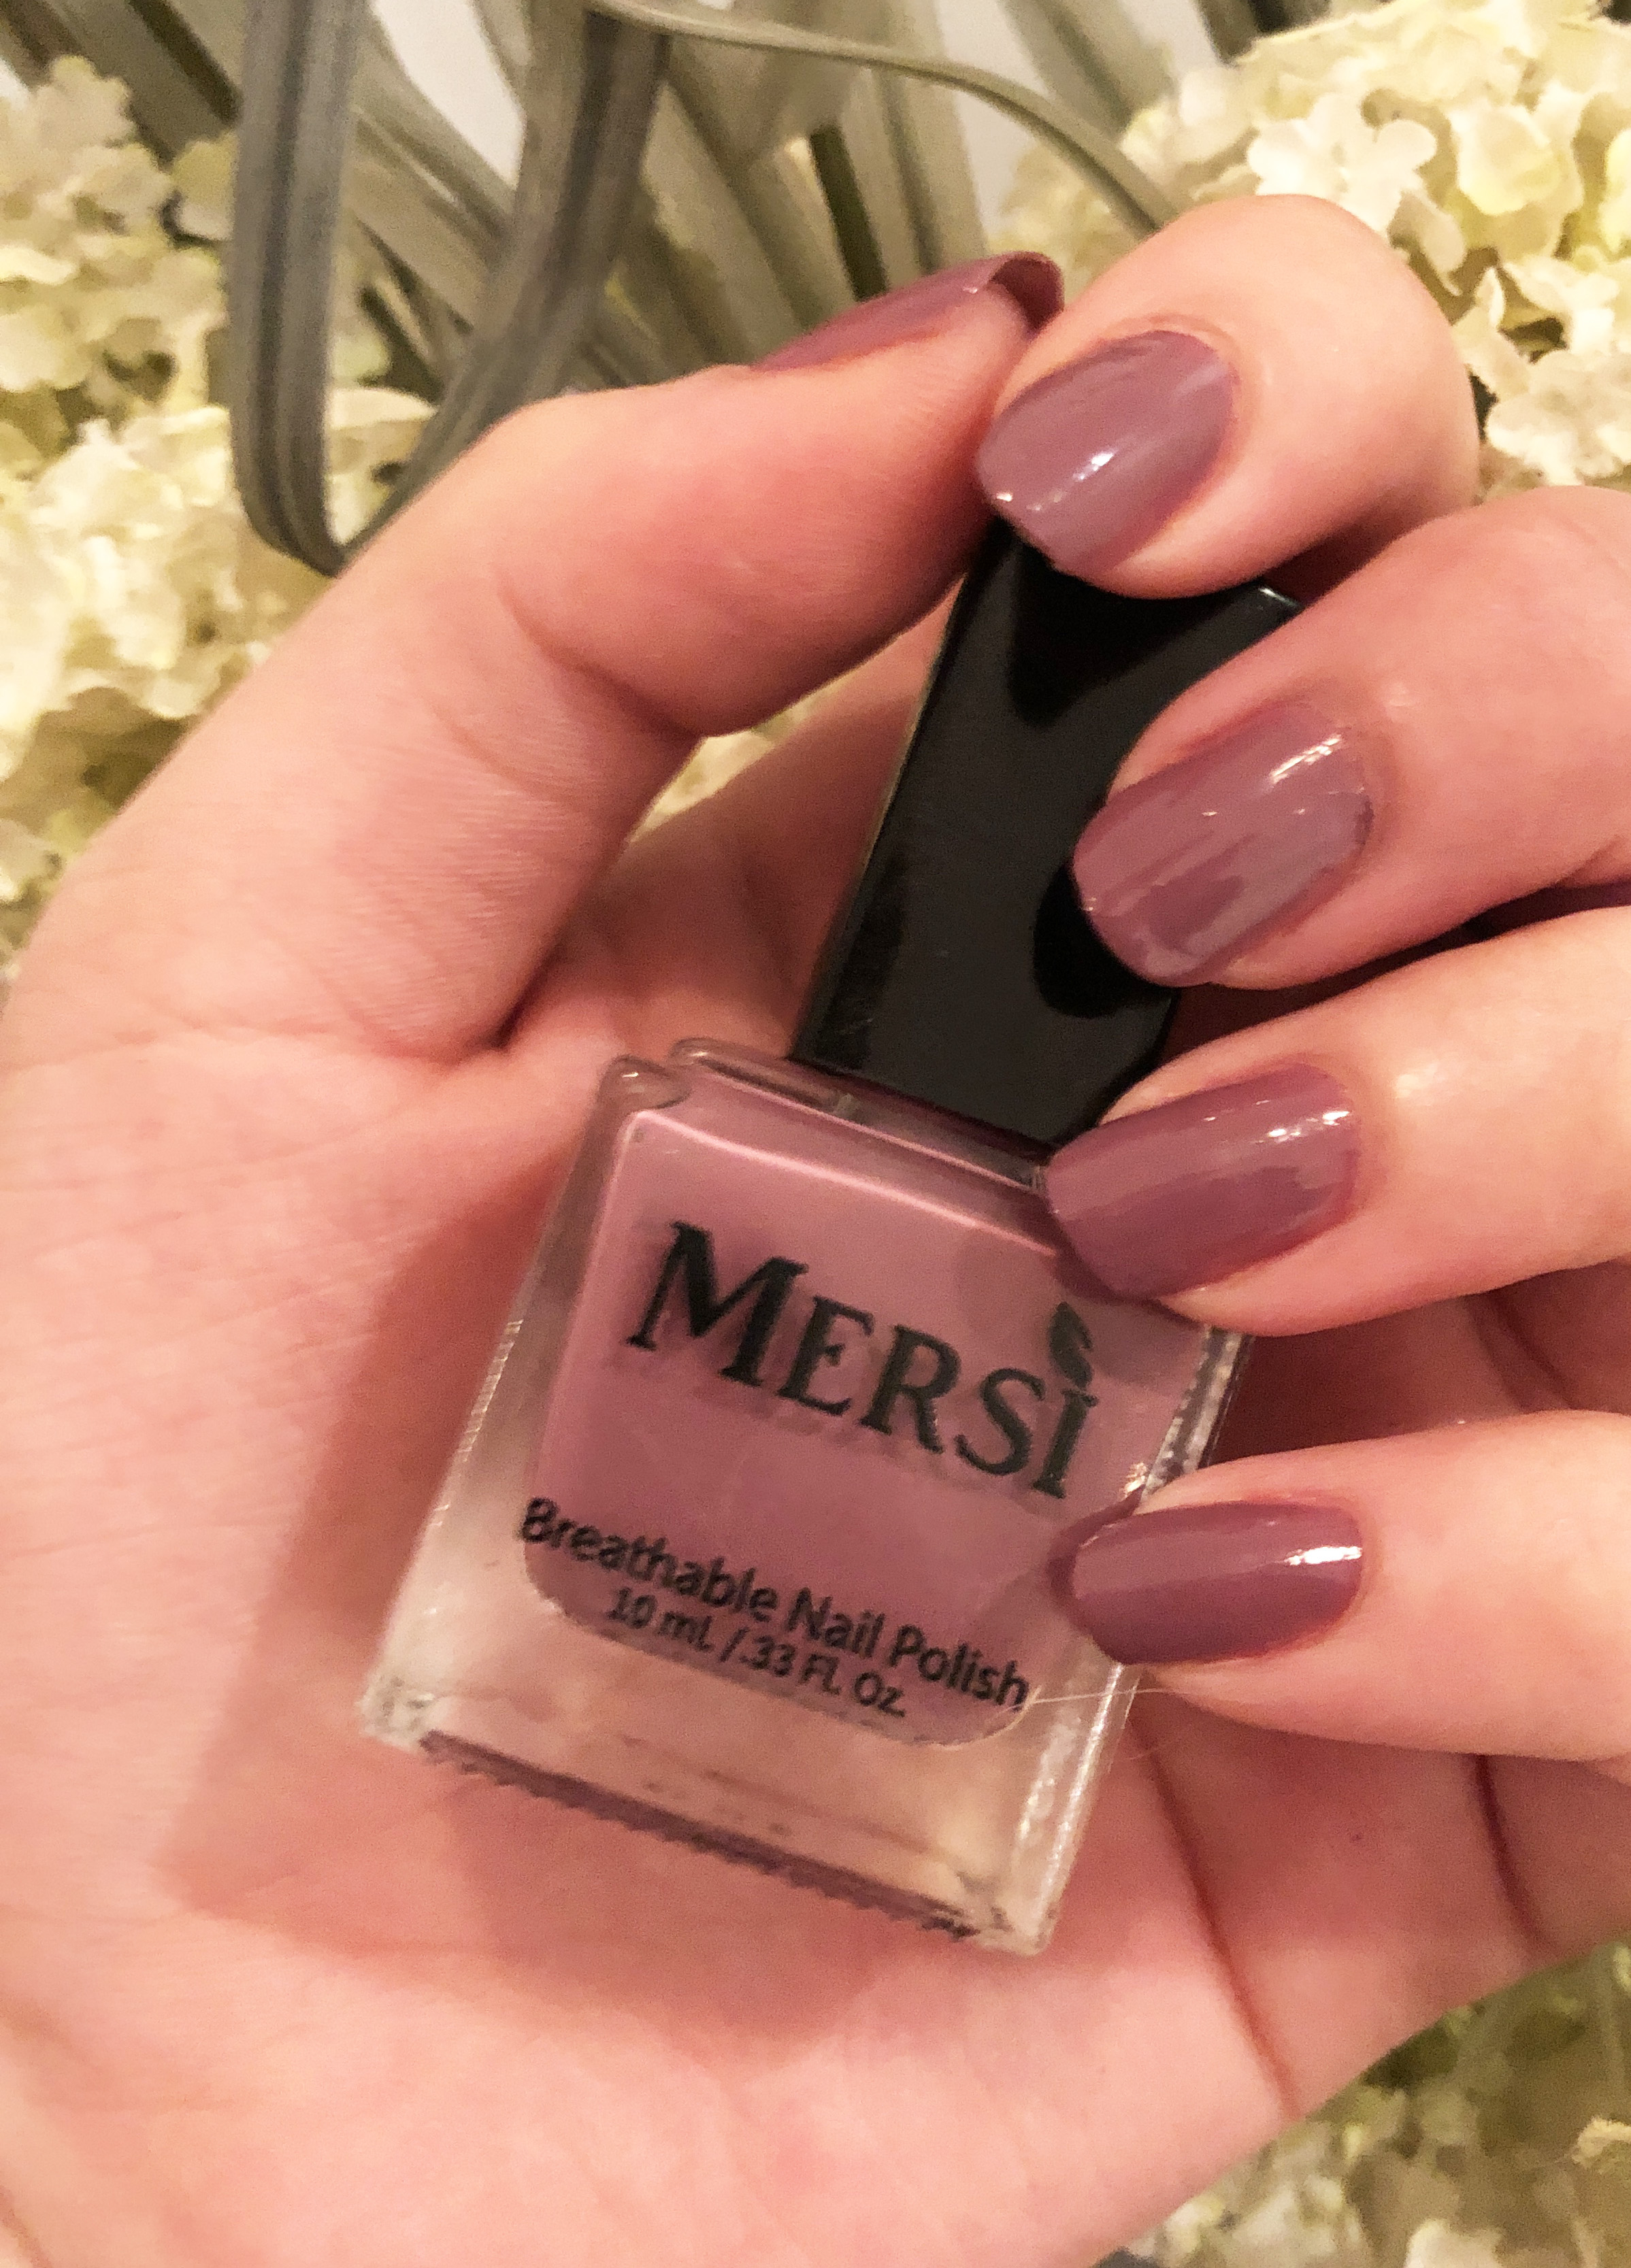 Mersi Cosmetics Launches Their Line Of Halal Nail Polish Newswire